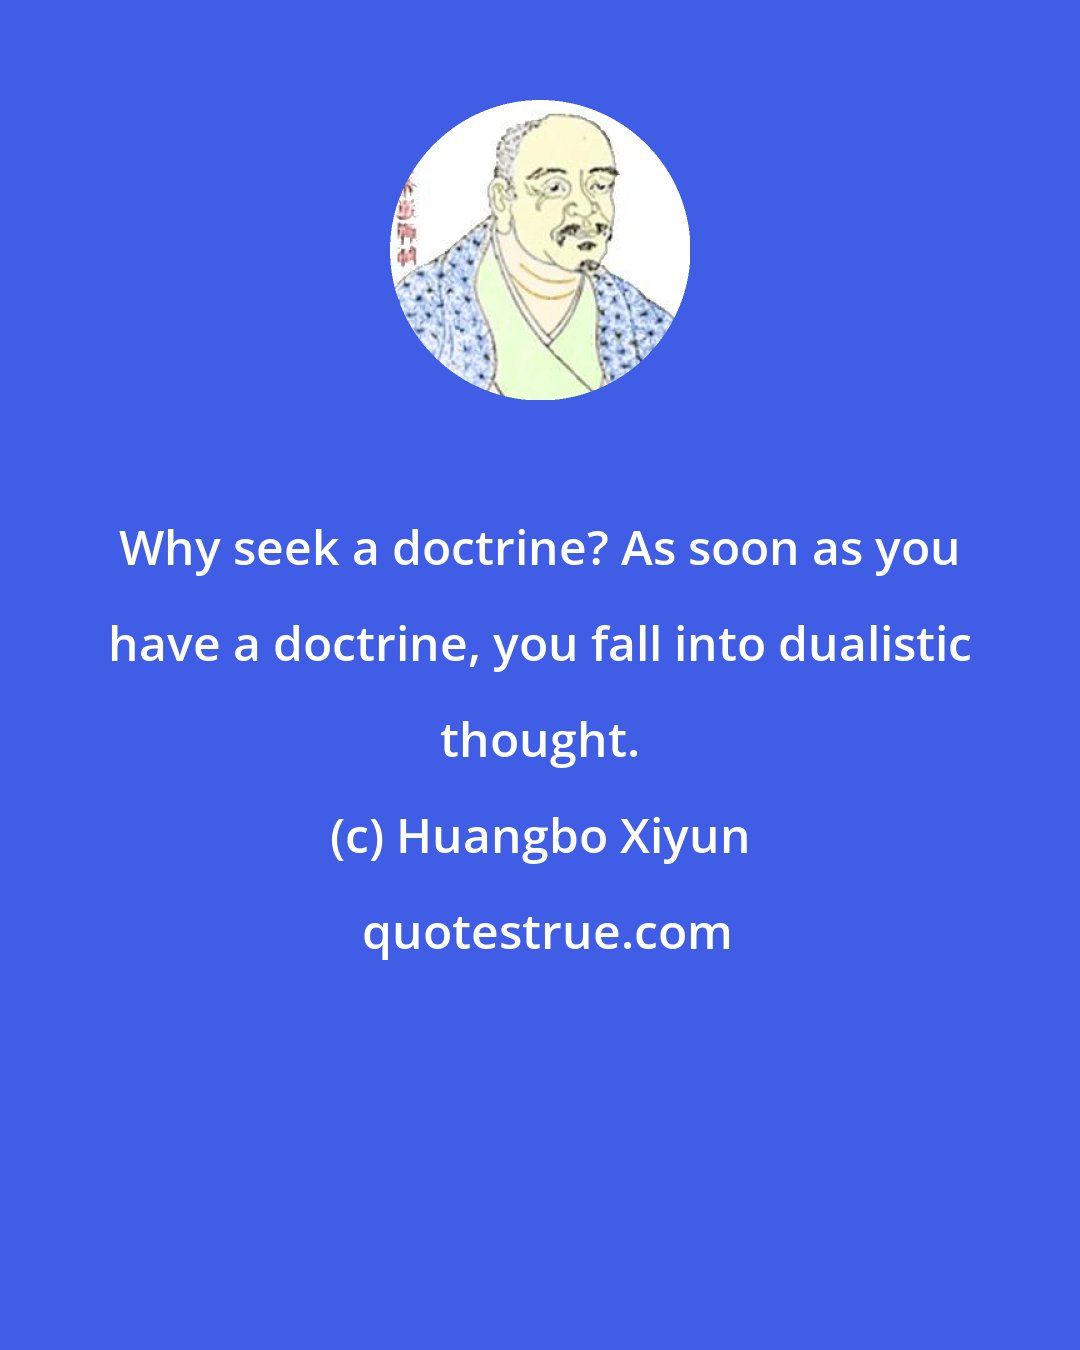 Huangbo Xiyun: Why seek a doctrine? As soon as you have a doctrine, you fall into dualistic thought.